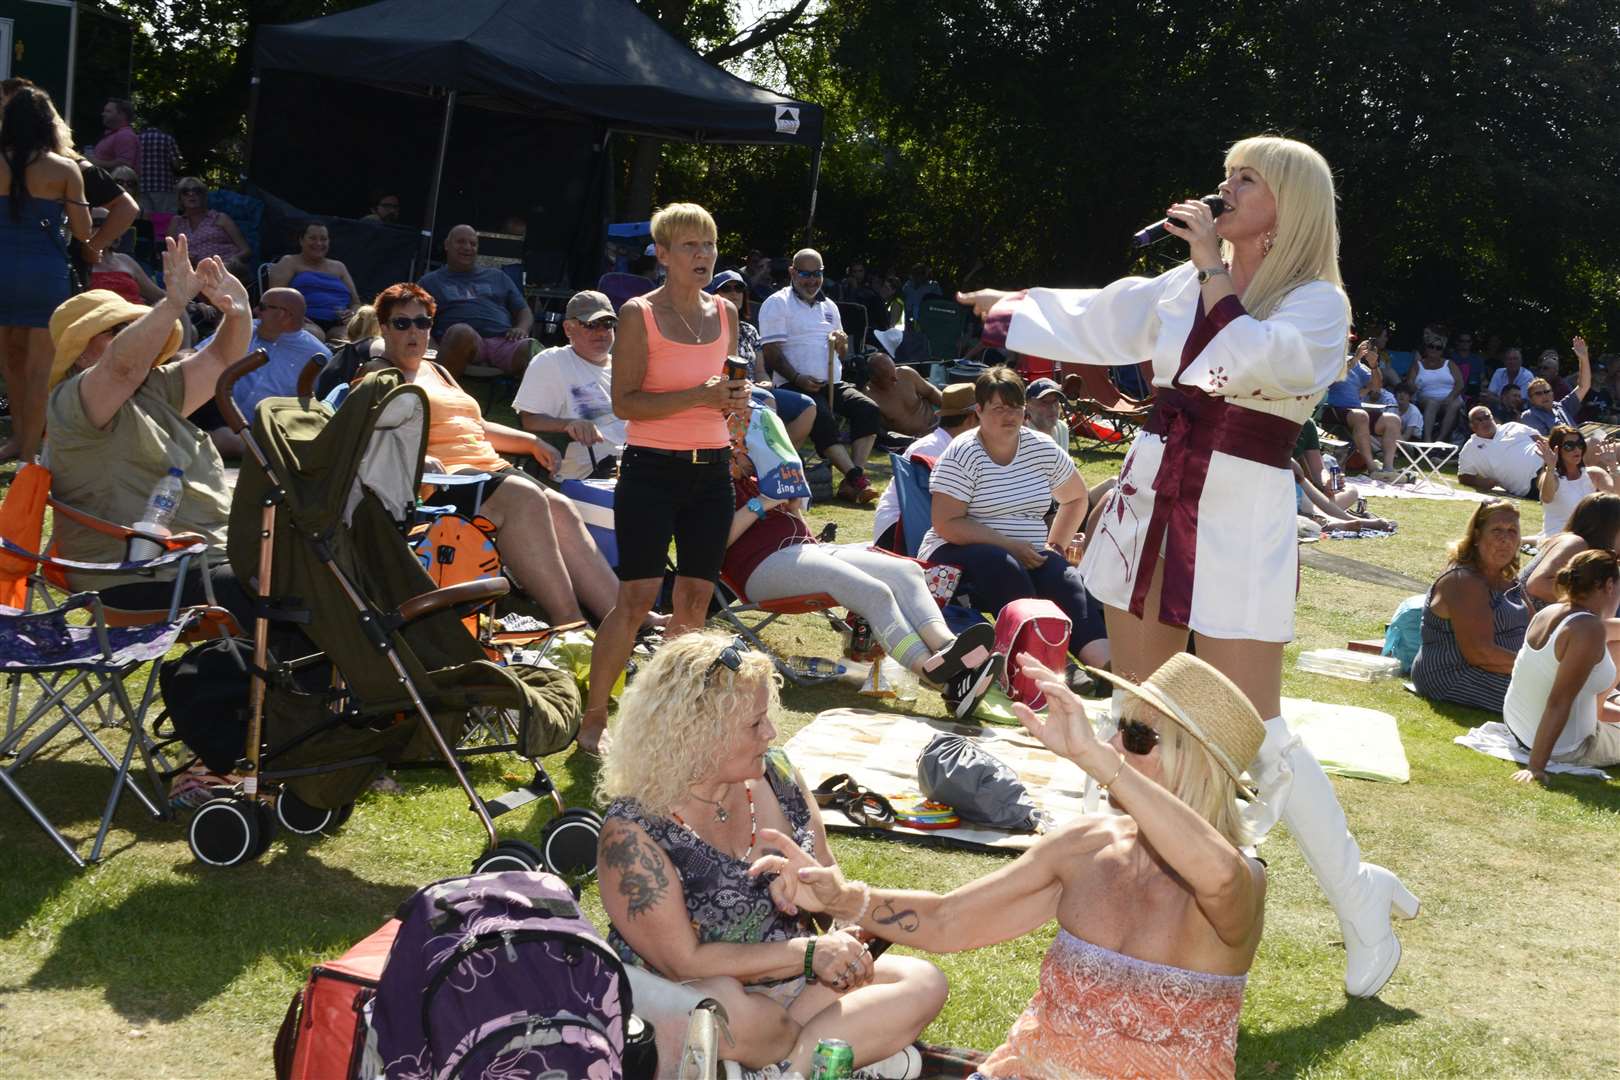 An Abba tribute joins the crowds for a singalong at a previous festival